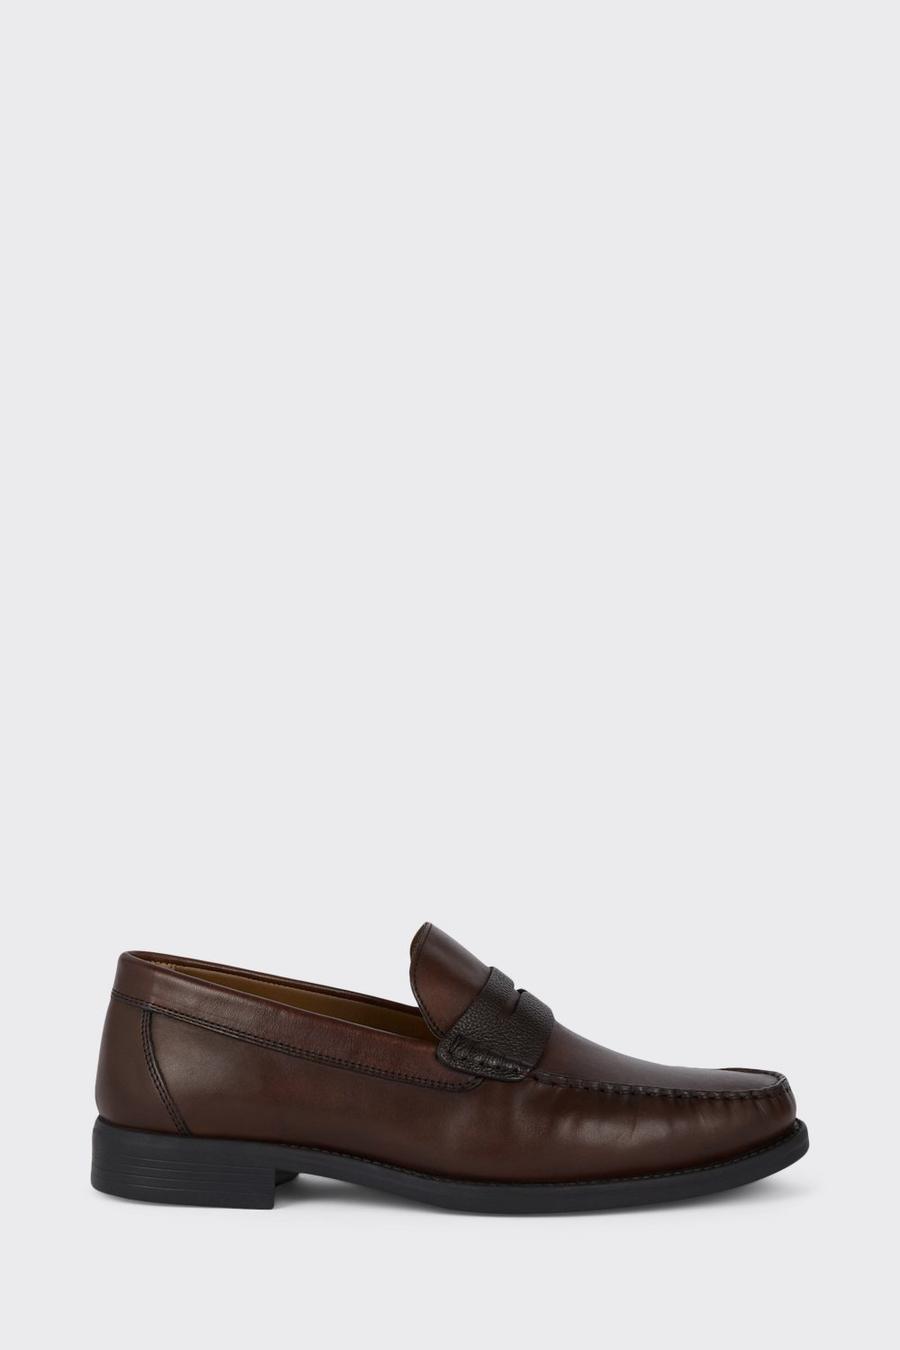 Leather Smart Textured Tan Penny Loafers